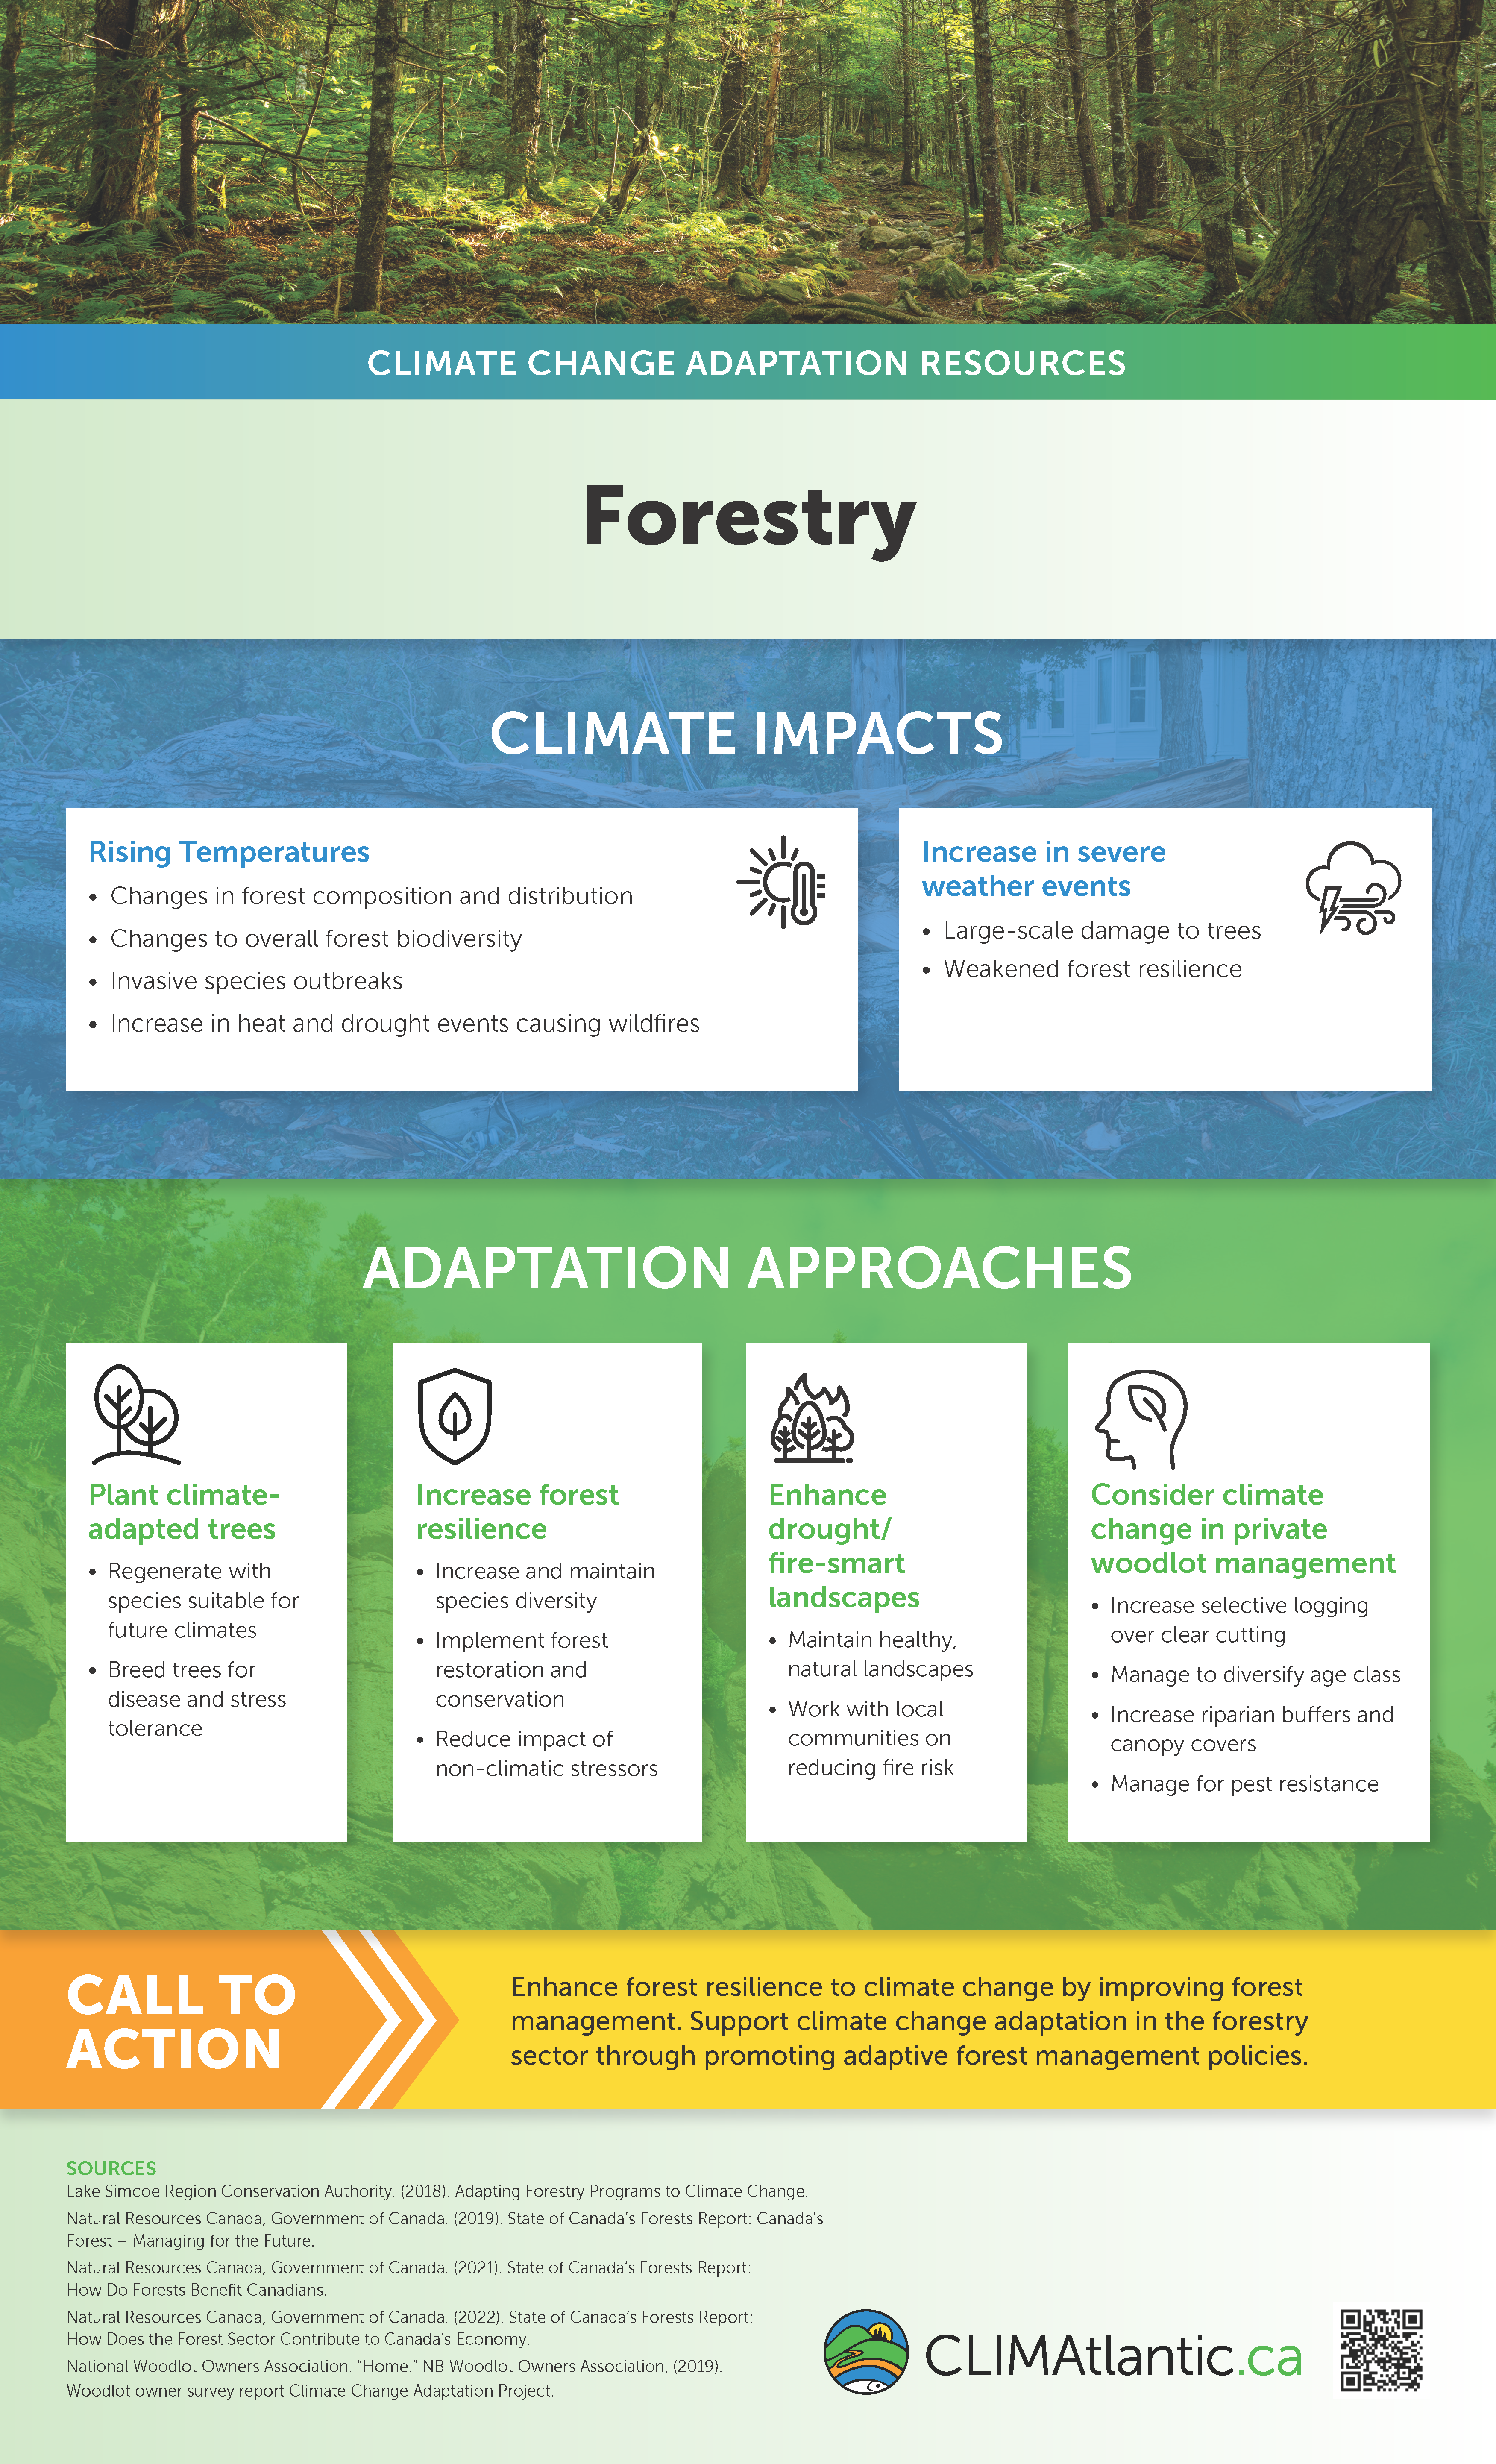 An infographic explaining the impacts of climate change on forests and suggested adaptation approaches. Click for full infographic.